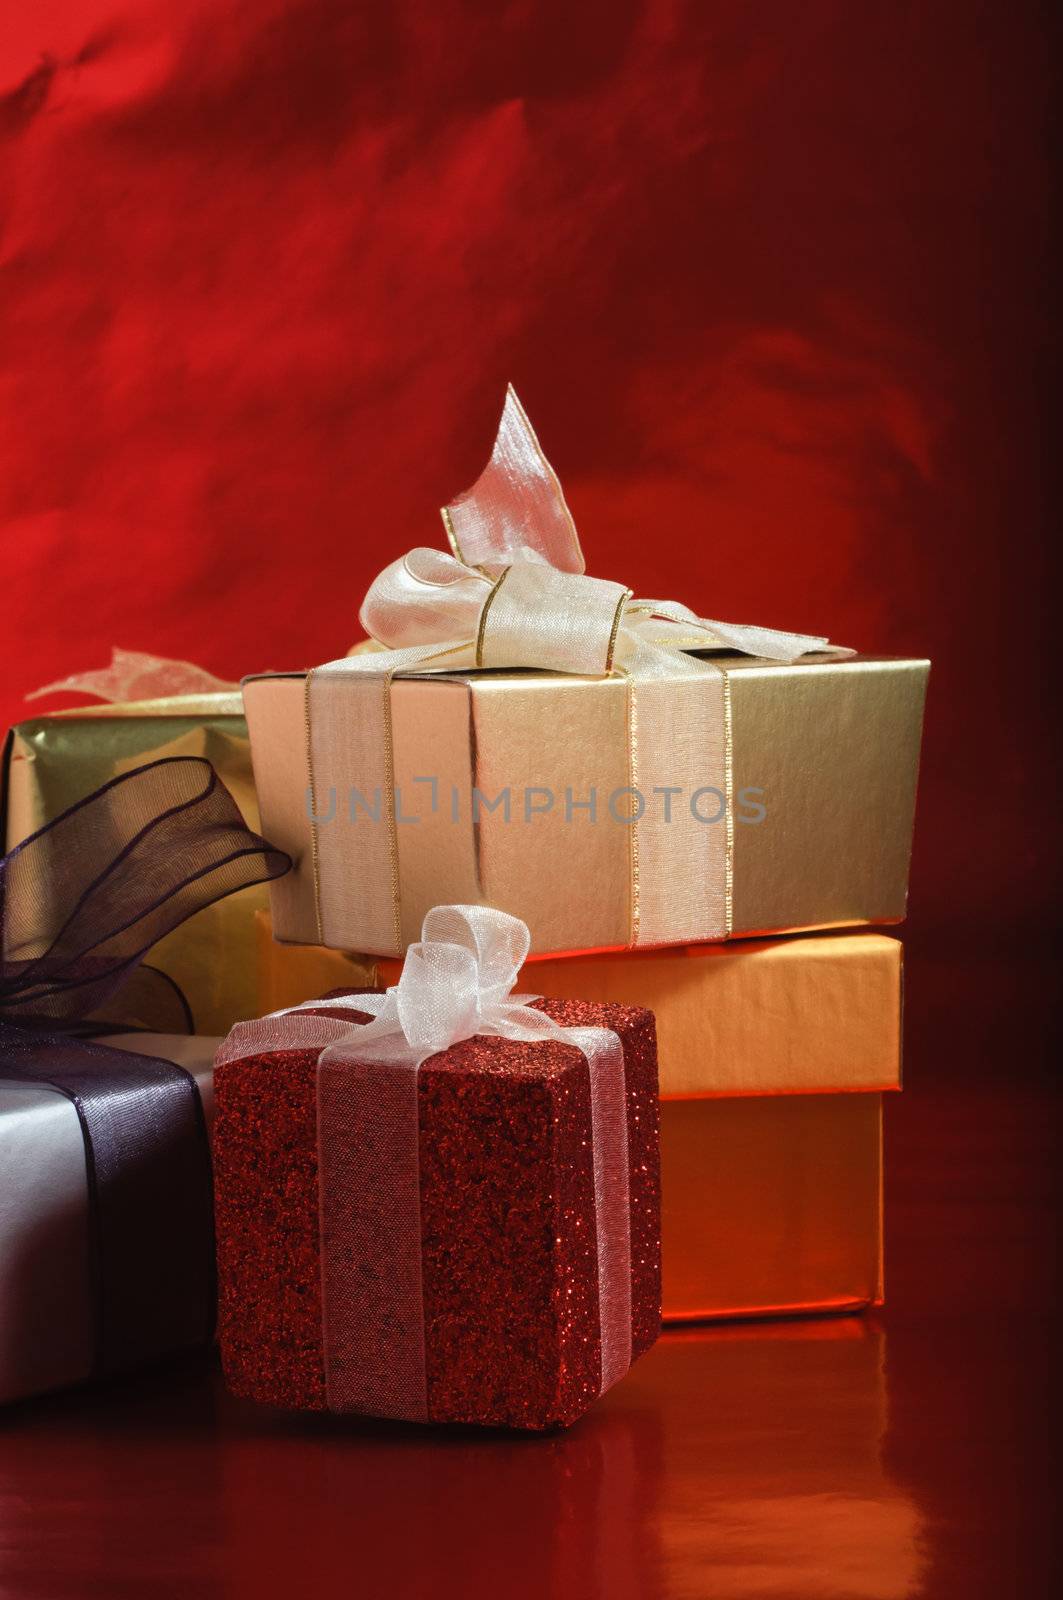 A selection of gift packages, tied with ribbons, against a foil red background.  Vertical (portrait) orientation.